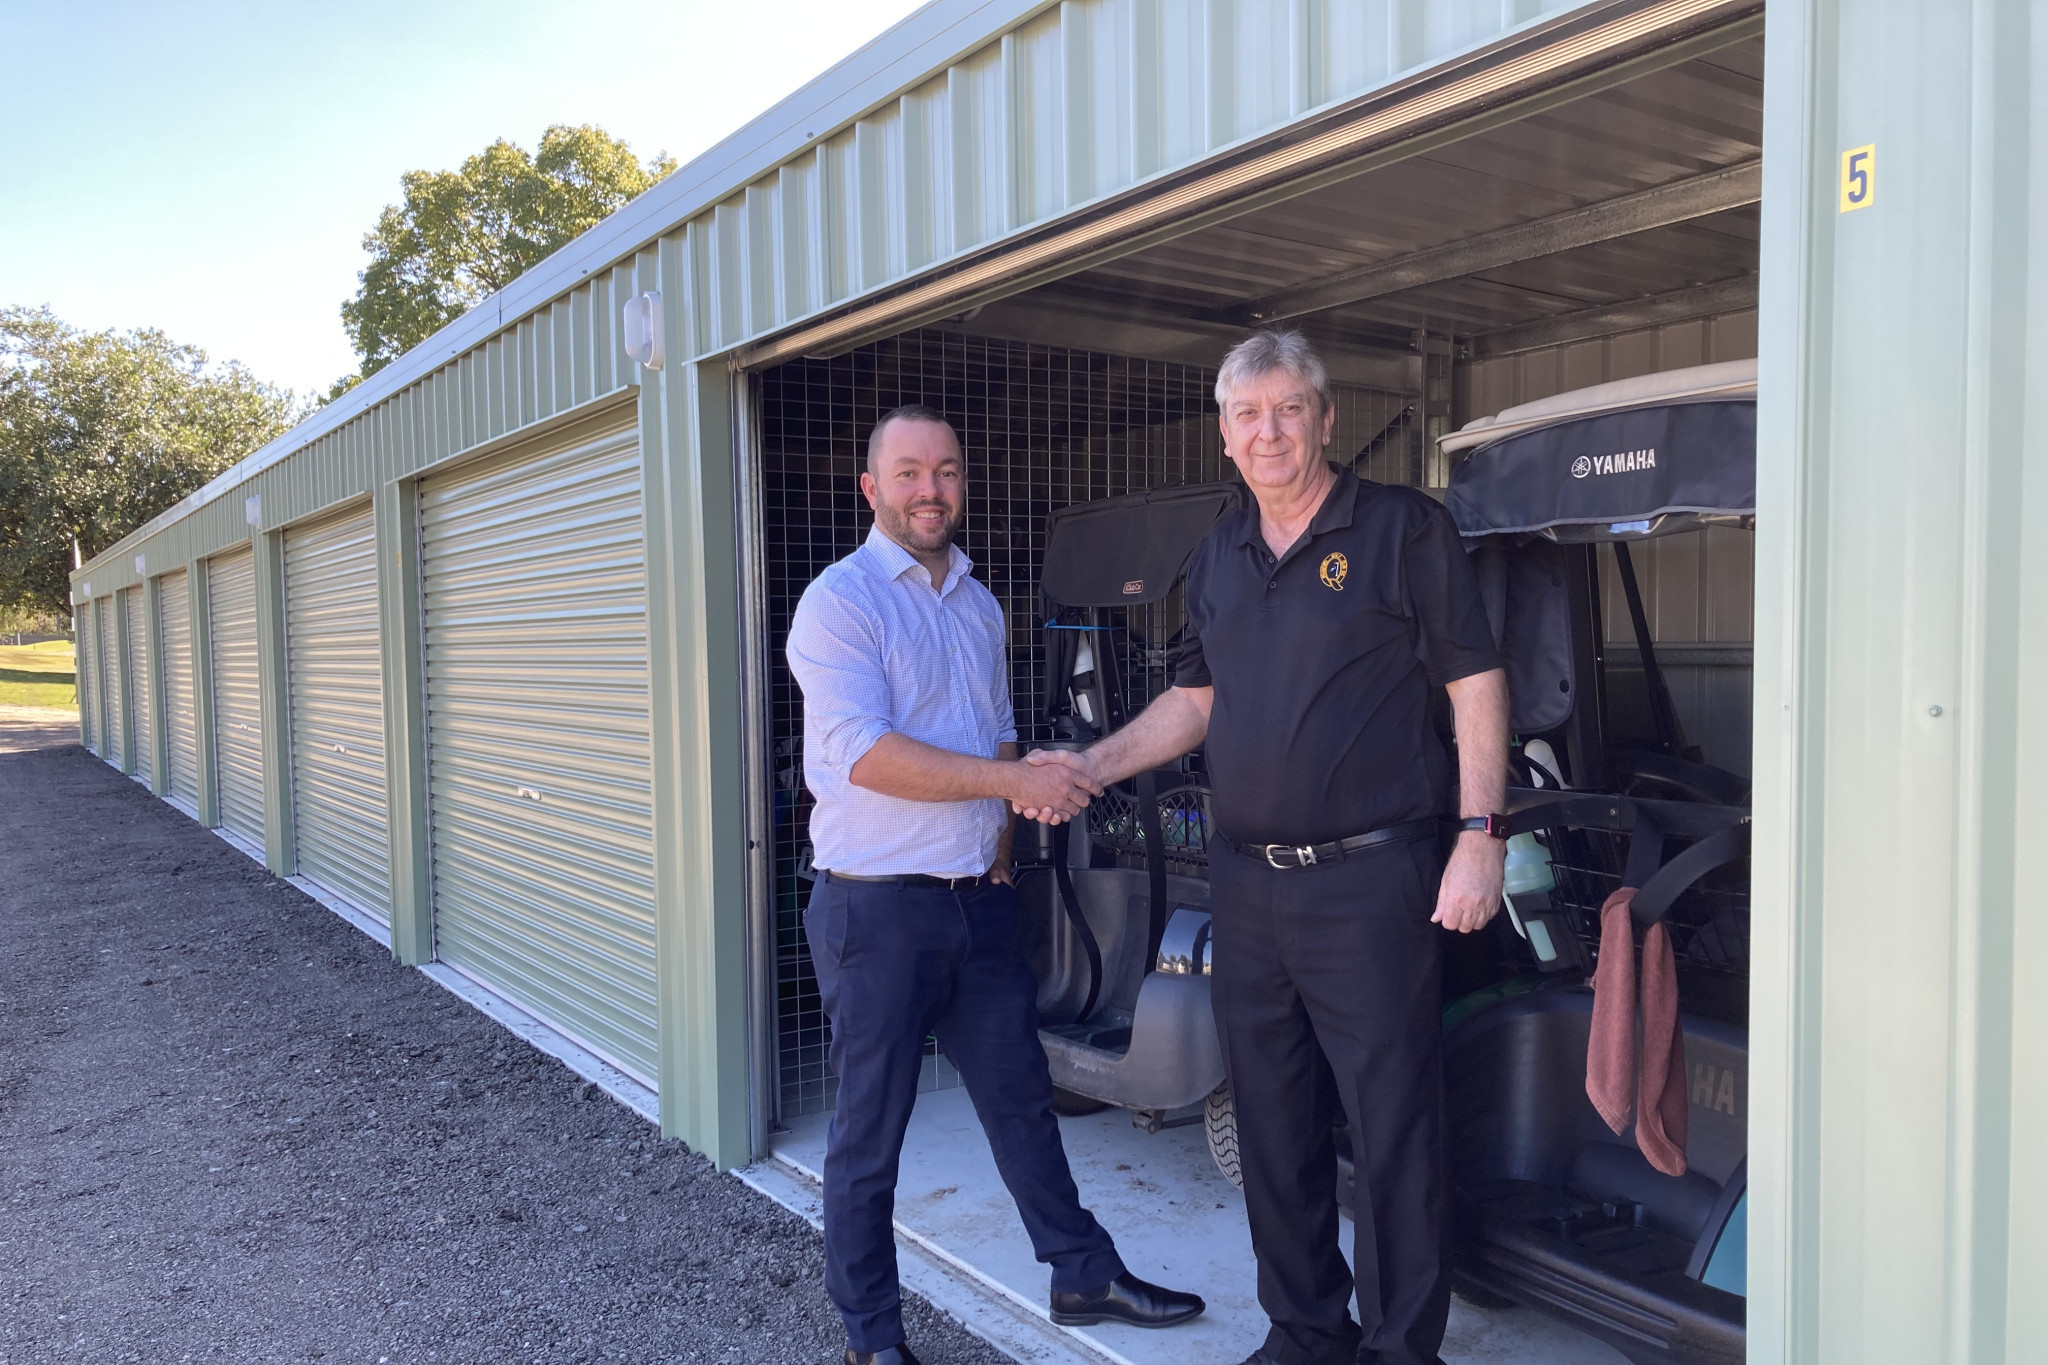 Woodford Golf Club house manager Pat McAtee (right) and Moreton councillor Tony Latter appreciate the addition of a fourth cart shed at Woodford Golf Club.